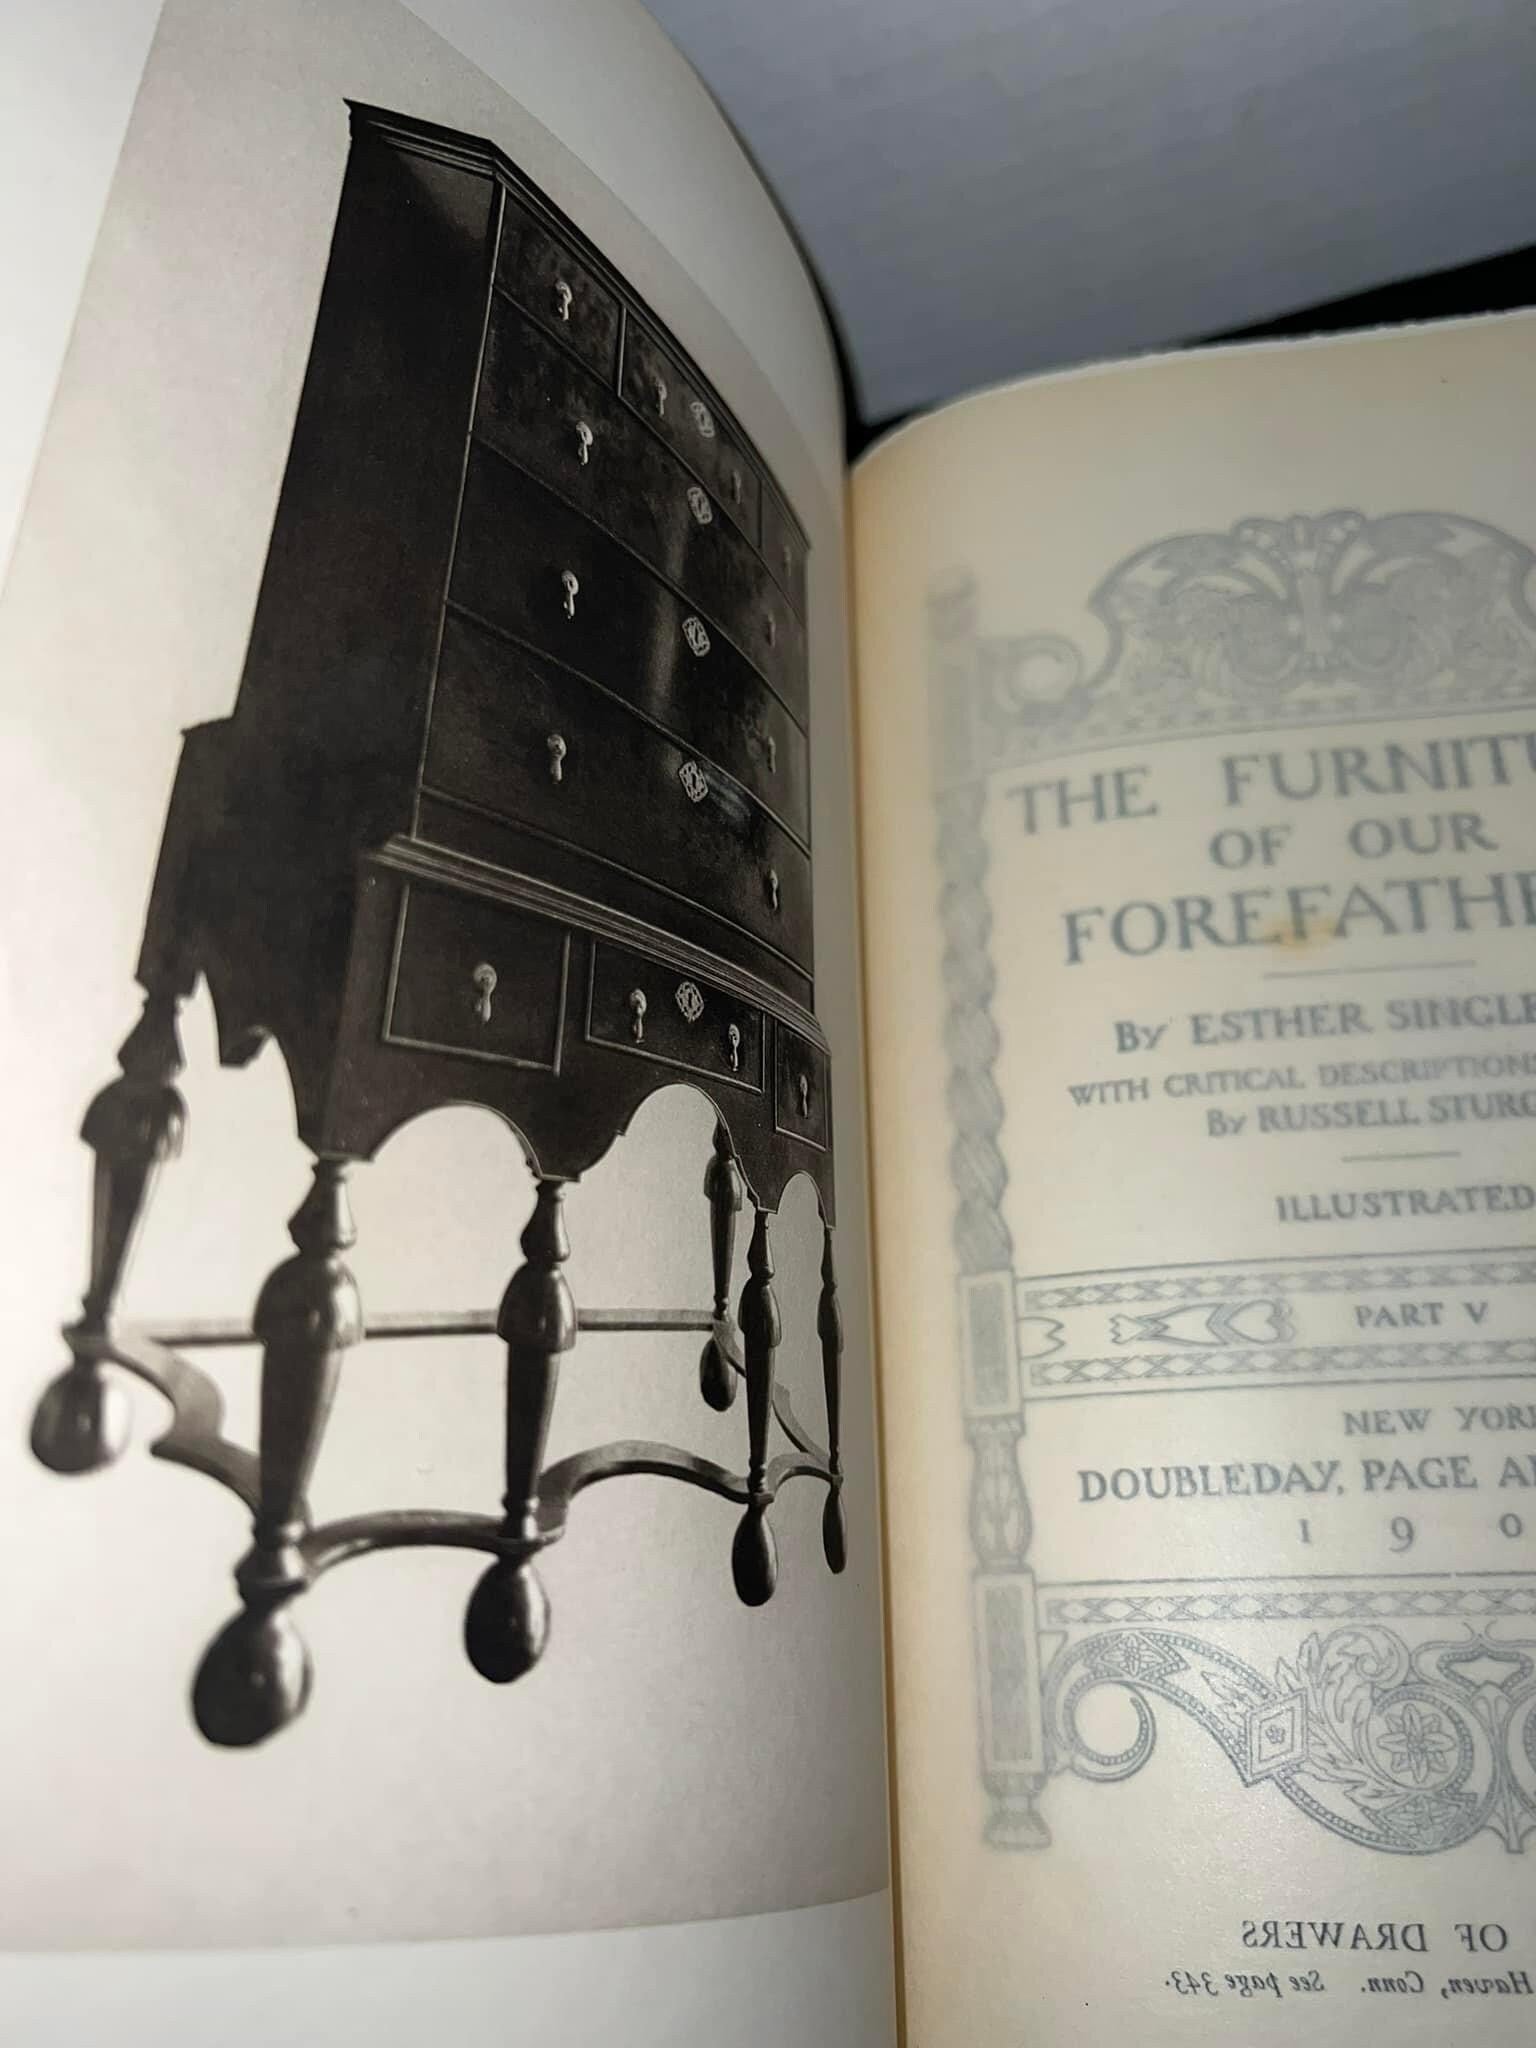 Antique 1901 - 7 volumes The furniture of our forefathers